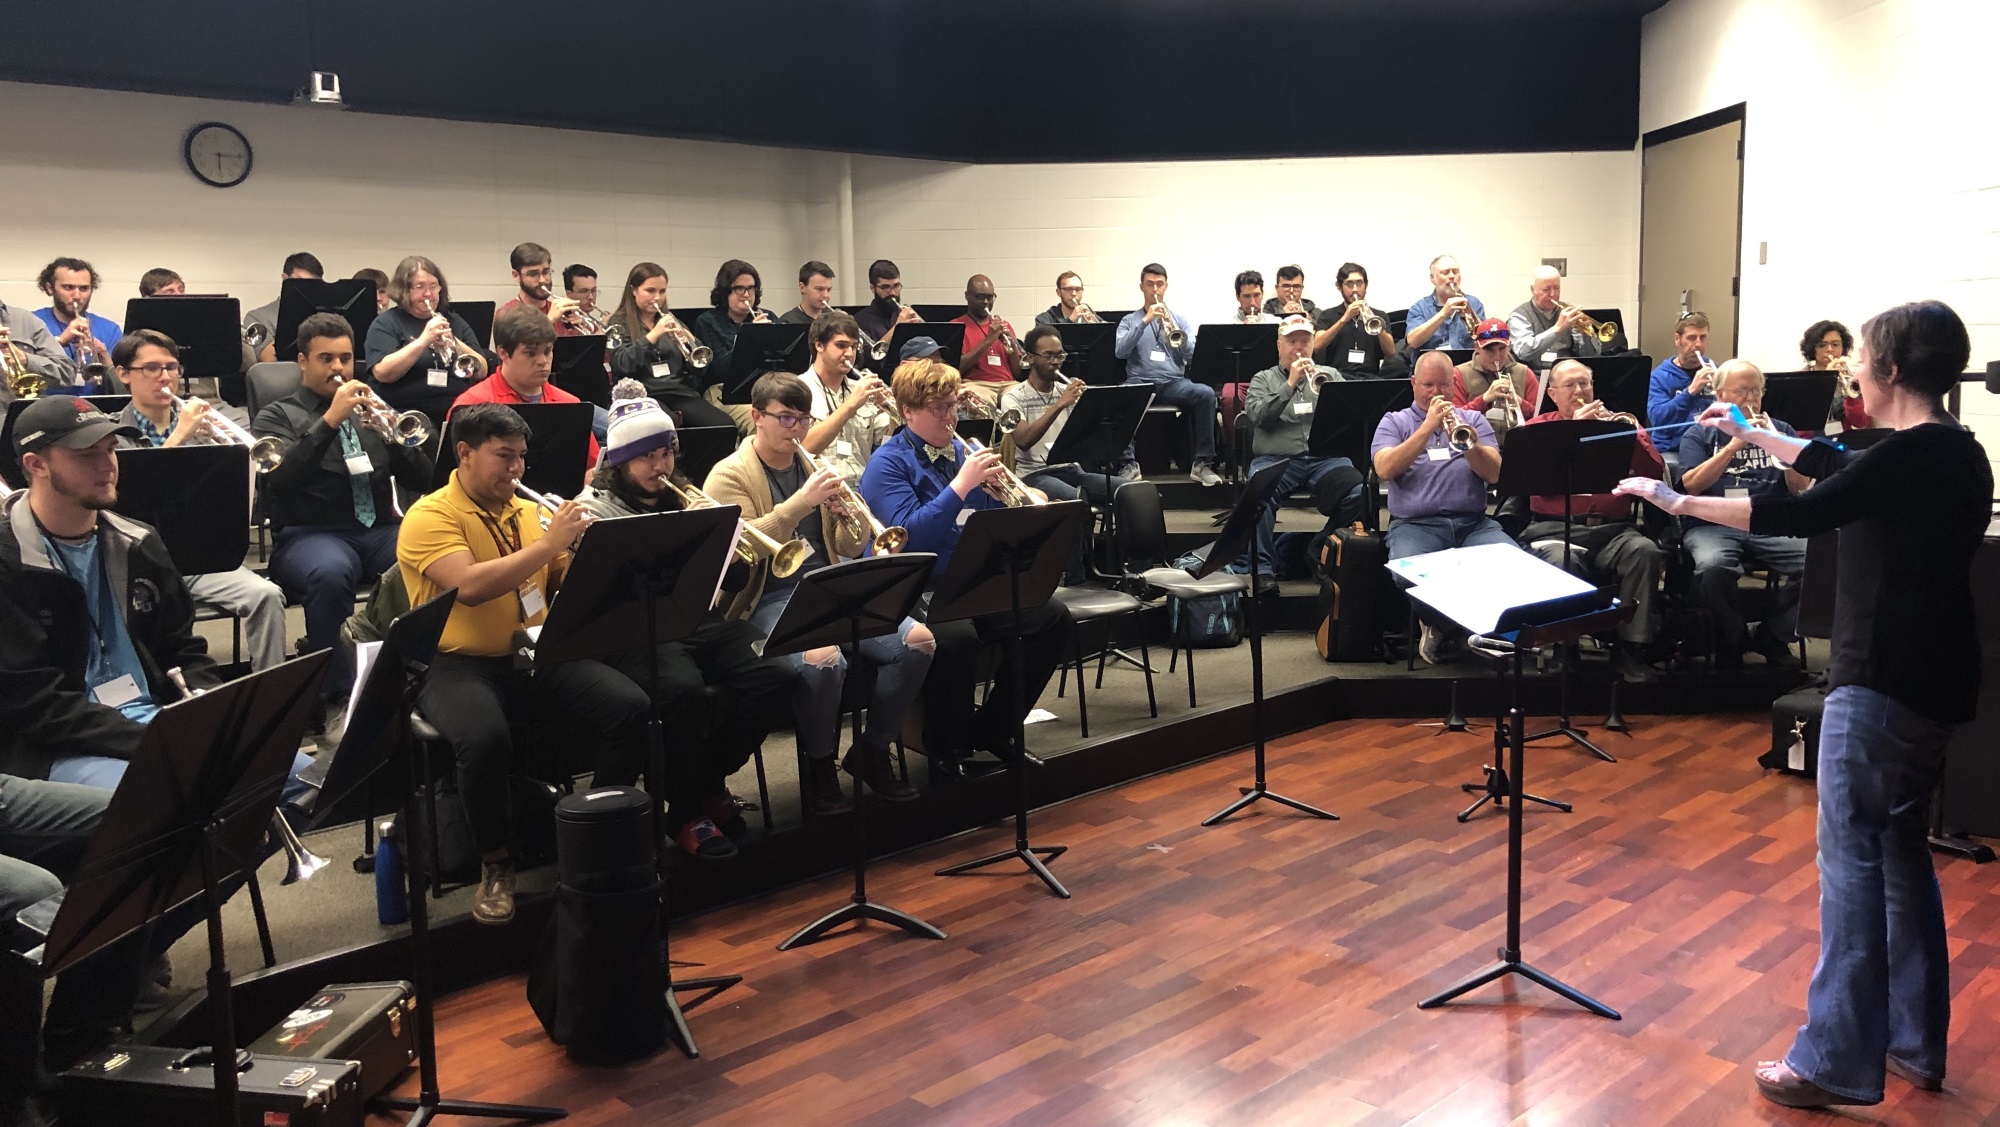 2019 Trumpet Festival of the Southeast The International Trumpet Guild